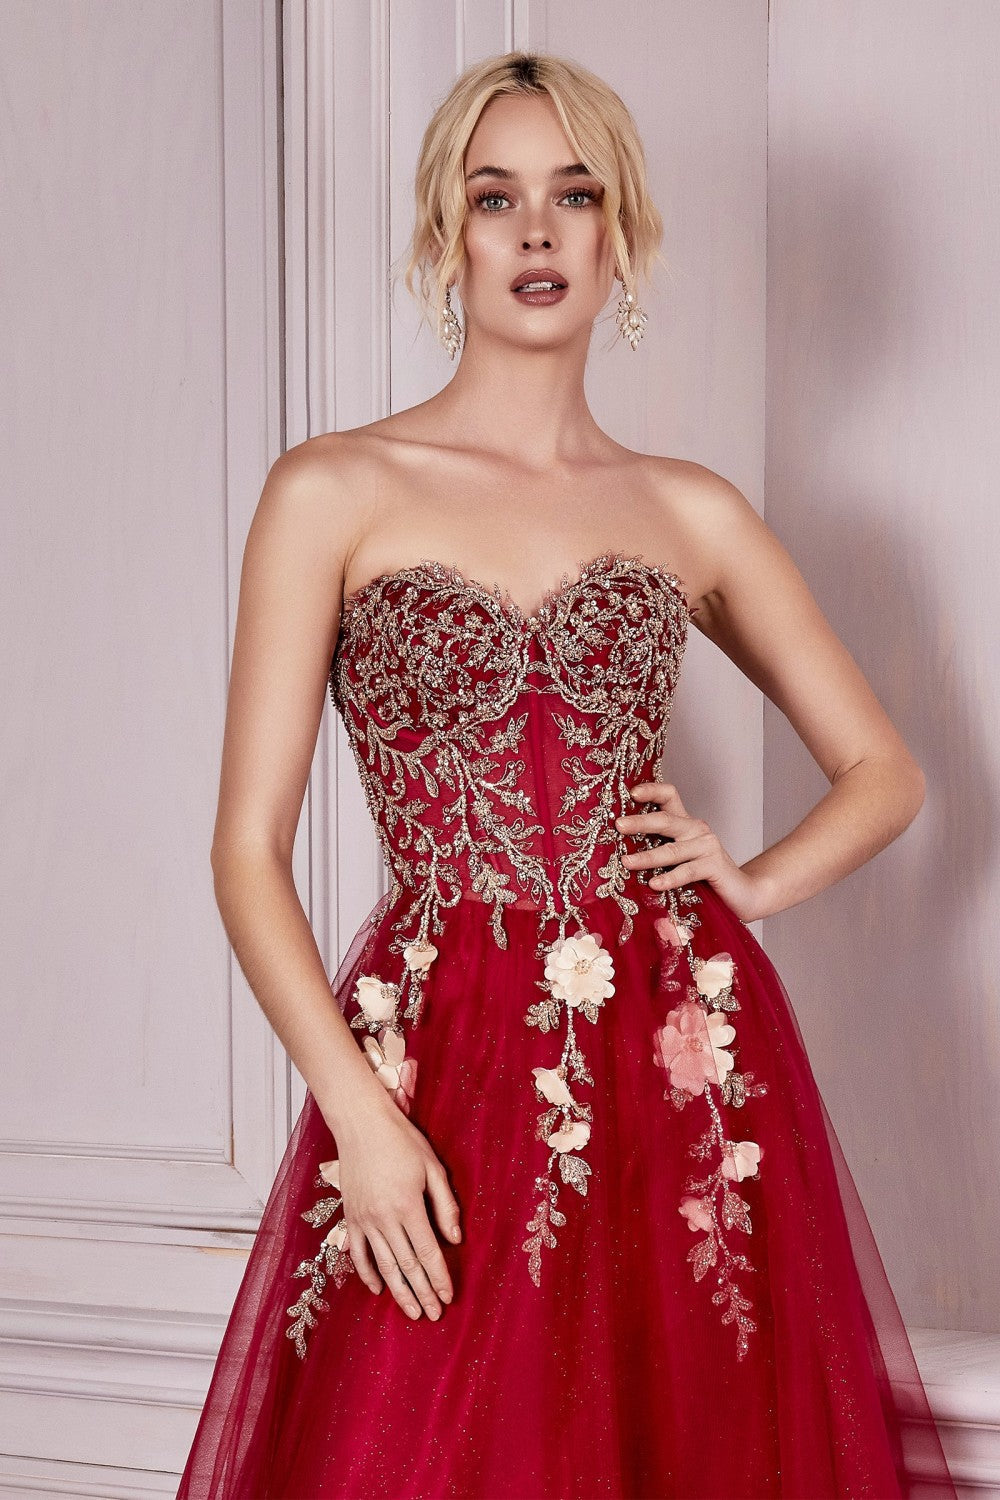 Strapless Layered Tulle Ball & Prom Gown Structured Embroidered Sequin Appliqué Corset Floral Vintage Dress A-line Skirt CDCD0191-2